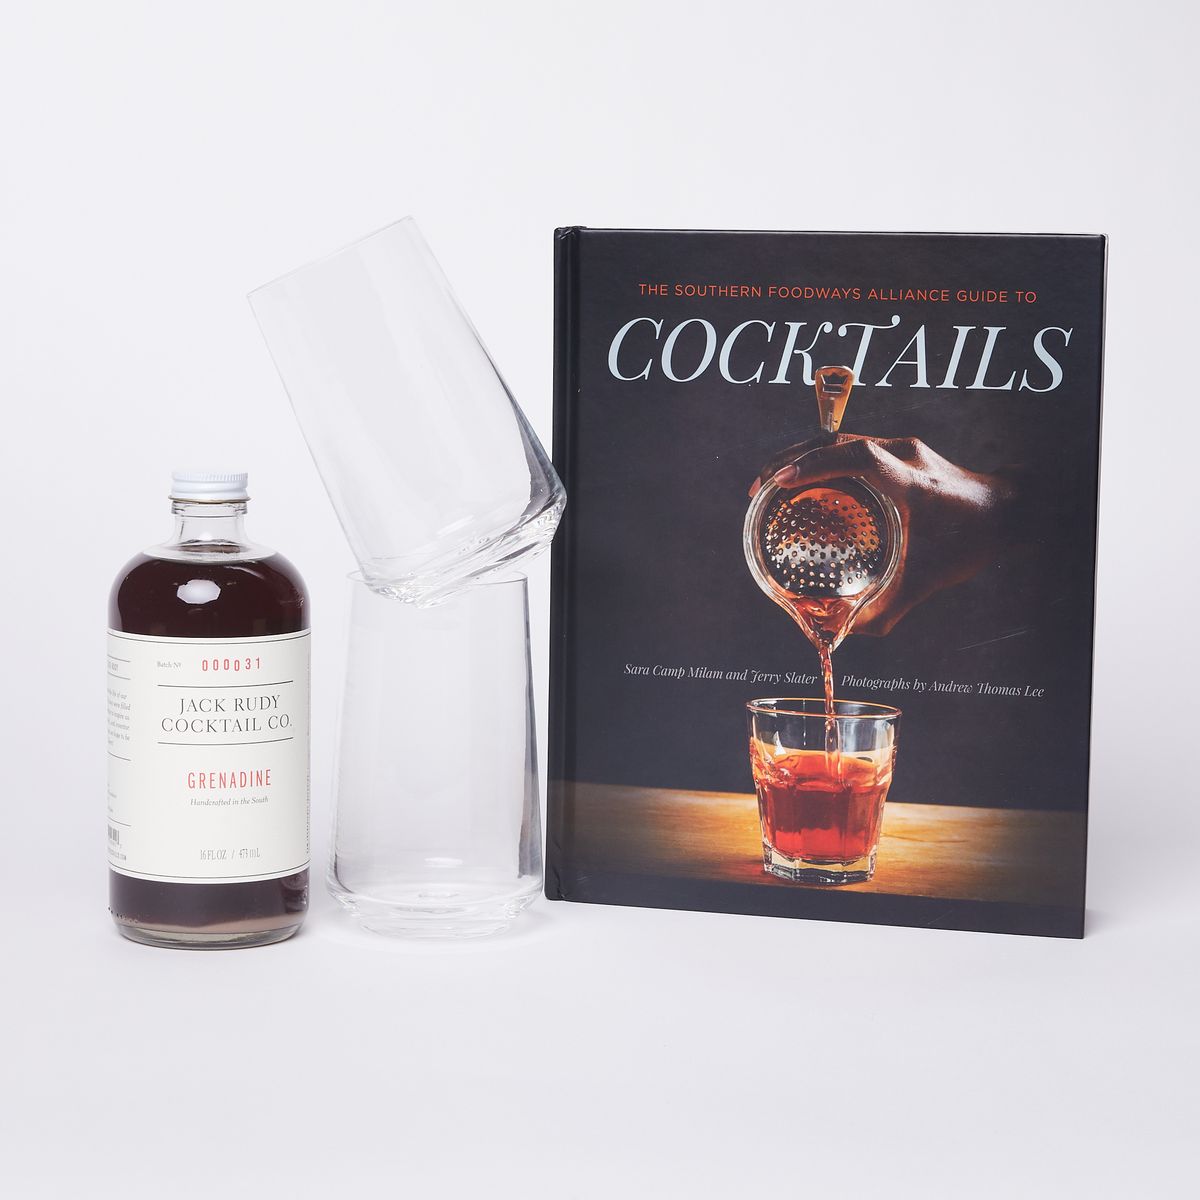 A full bottle of grenadine next to a set of stacked clear glass tumblers and a book with a cover the shows a picture of a drink being poured with the word "Cocktails"